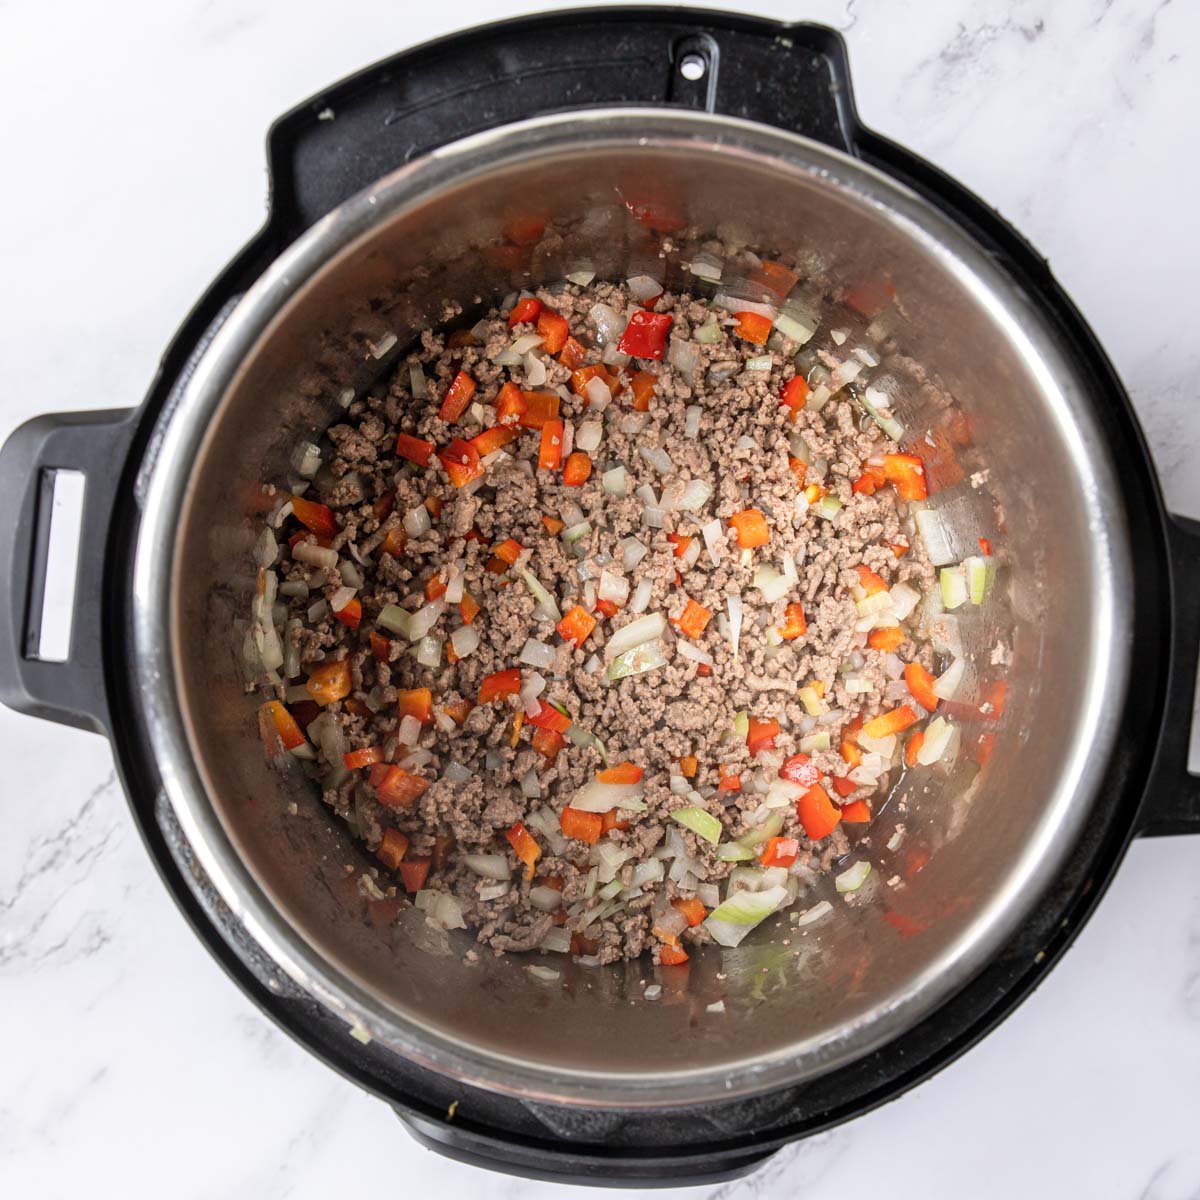 Instant Pot with ground beef, onions and bell peppers.